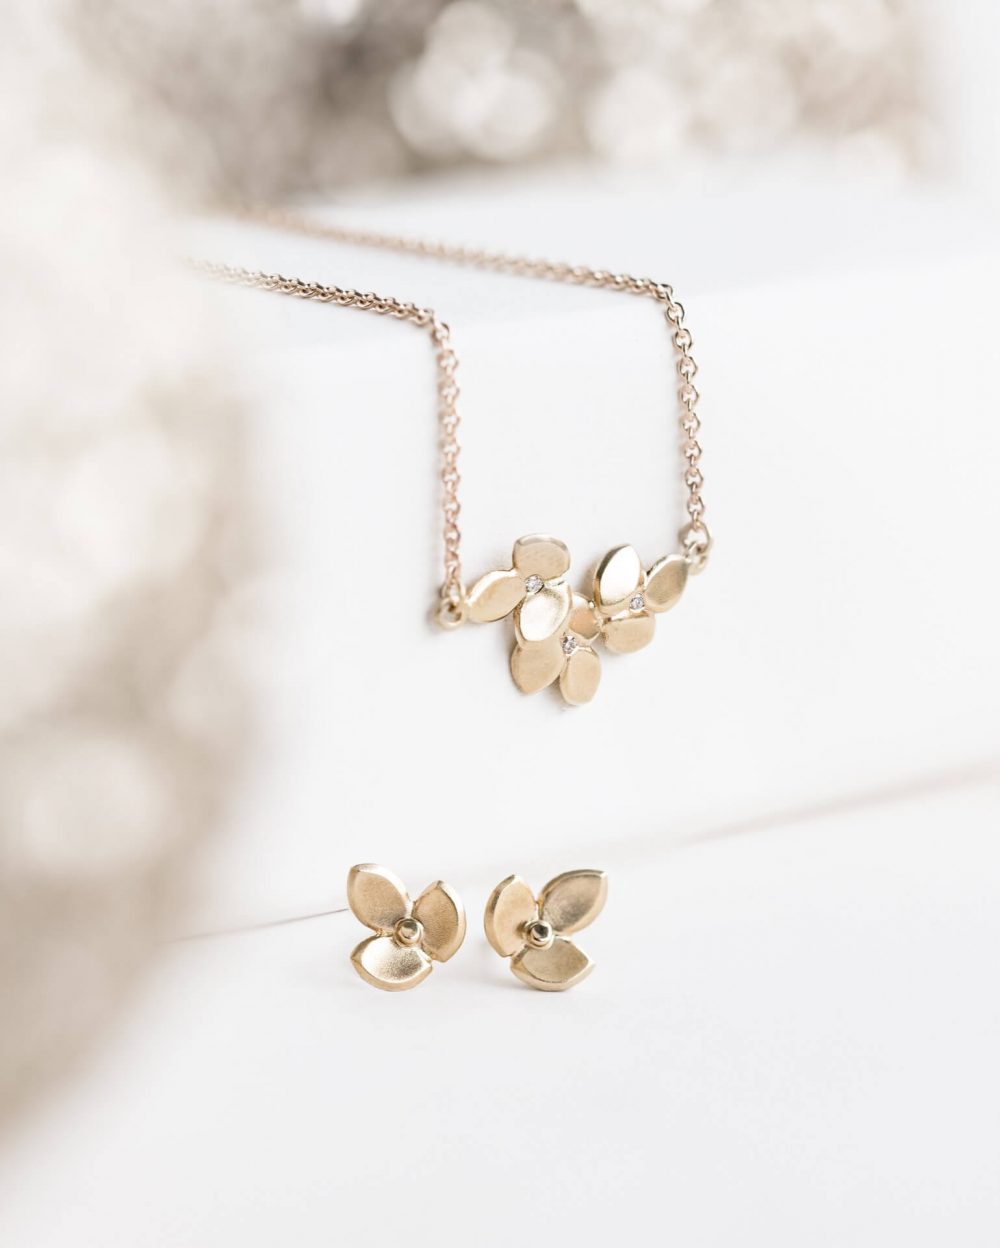 Eve Floral Gold Diamond Necklace And Earrings Jewellery Gift Set Featured Delicate Gold Diamond Stud Earrings And Simple Gold &Amp; Diamond Necklace.